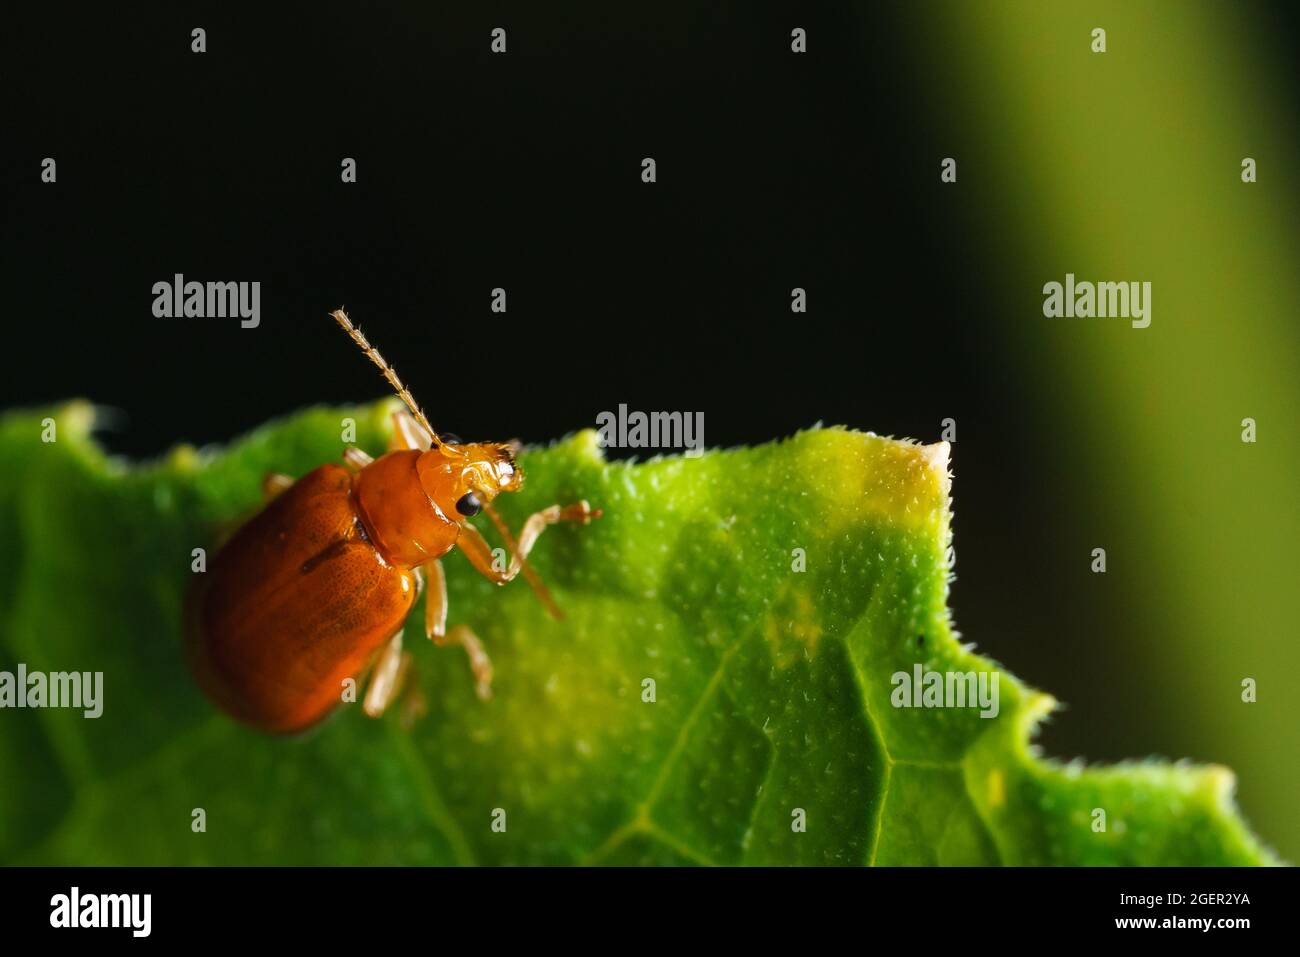 Pumpkin beentle Cucurbit Leaf Beetle or Yellow Squash Beetle it is classified as one of the insect pests. Stock Photo